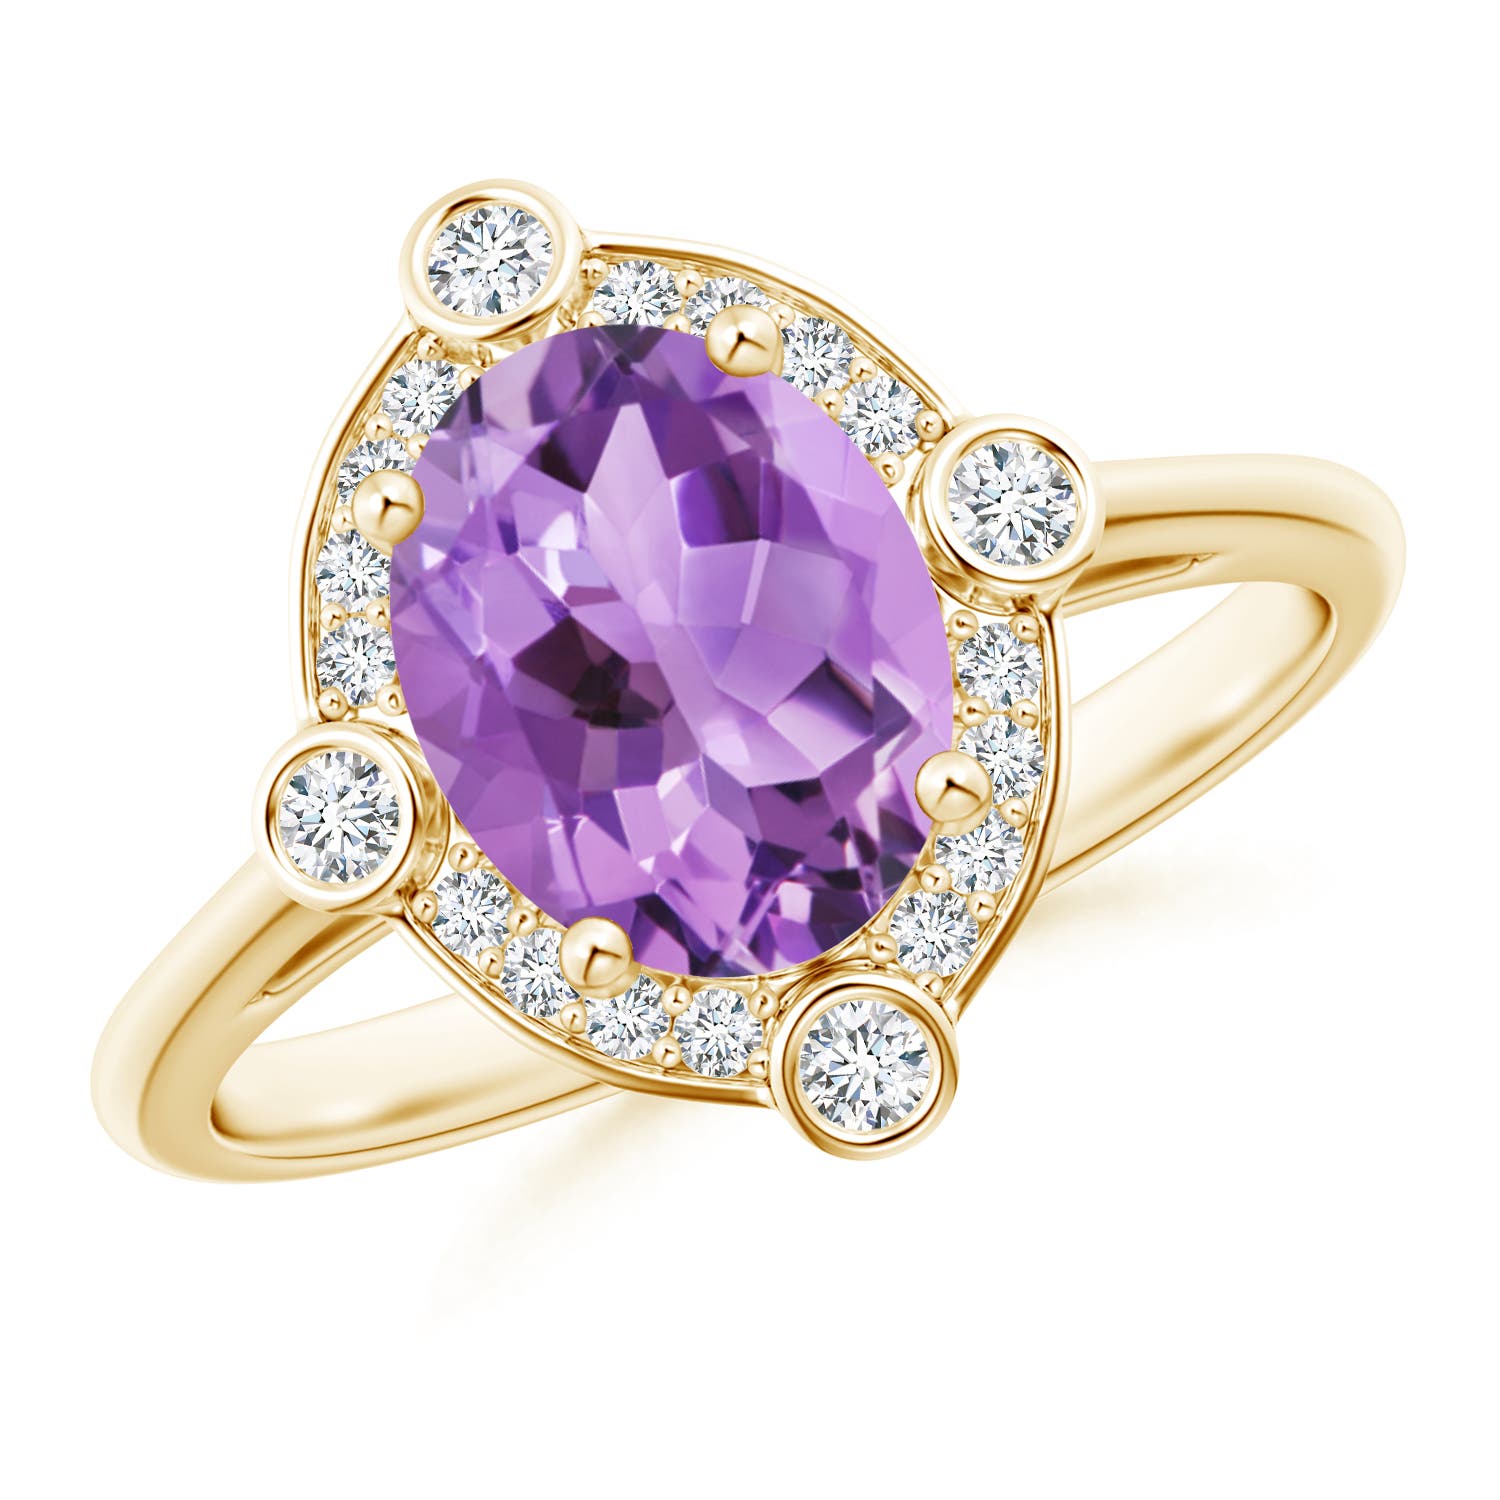 A - Amethyst / 1.74 CT / 14 KT Yellow Gold